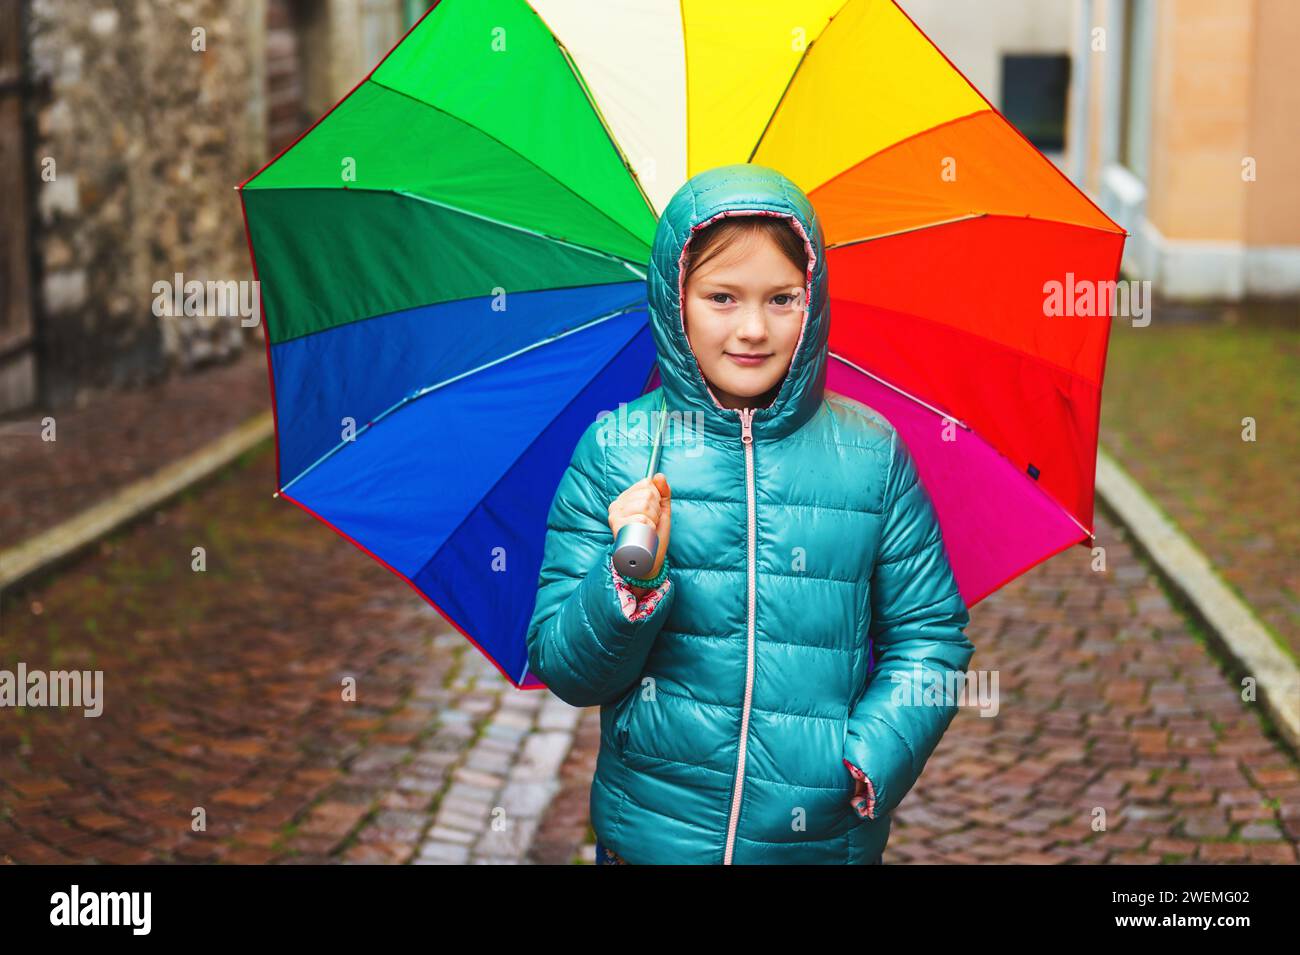 Outdoor portrait of a cute little girl, wearing warm green jacket, holding big colorful umbrella Stock Photo